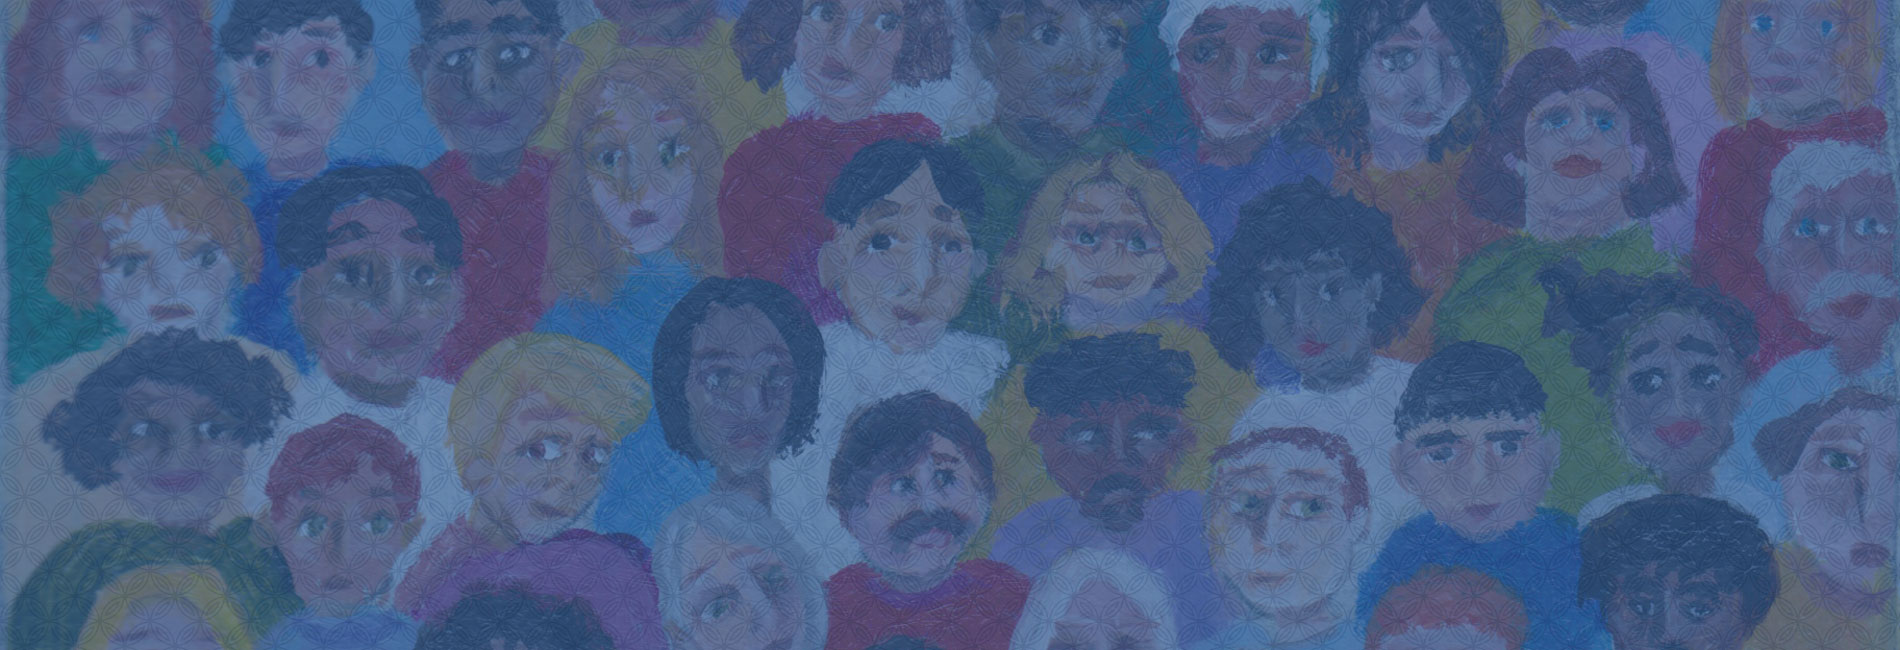 Banner image: painted collage of diverse group of people and faces